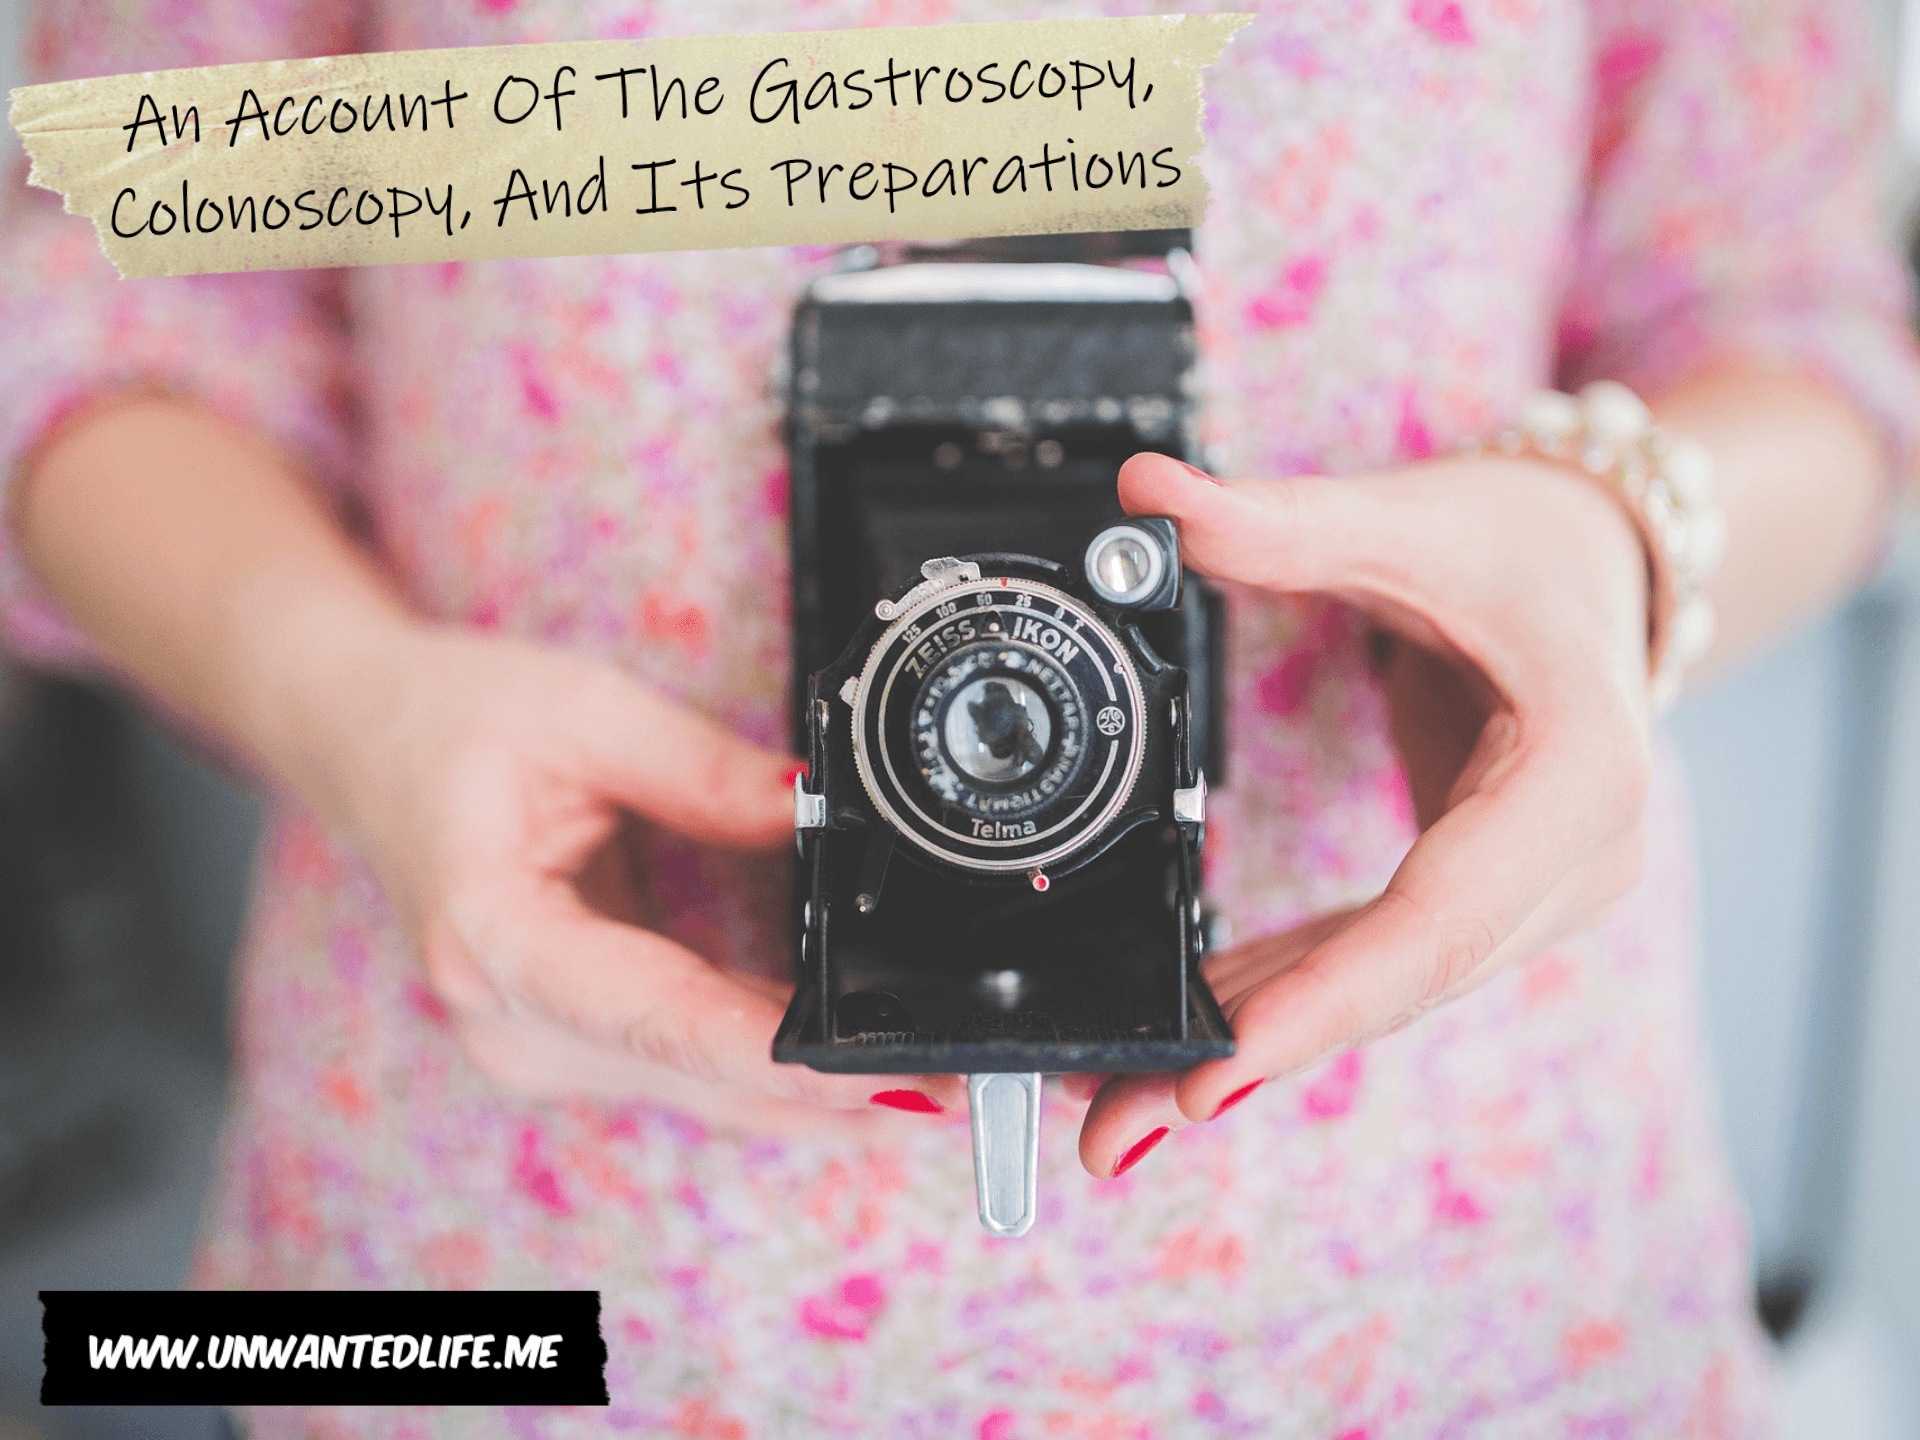 A photo of a woman's torso in a dress who's hold an old camera towards to camera for the photo. The article title - An Account Of The Gastroscopy, Colonoscopy, And Its Preparations - is in the top left corner of the image